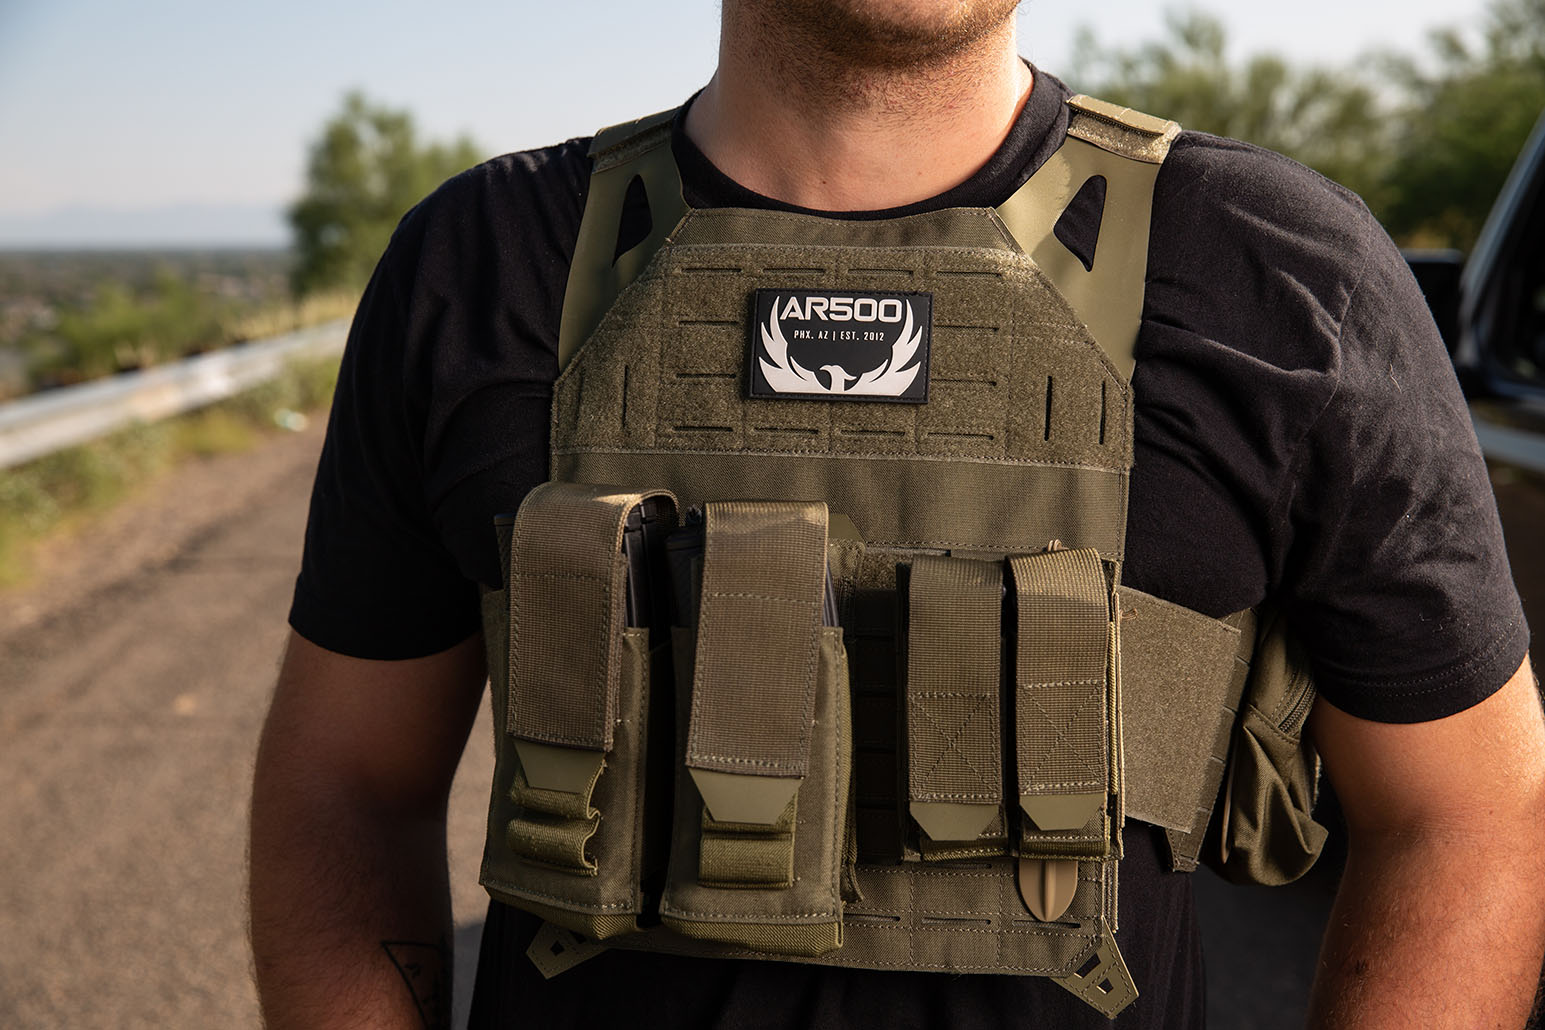 Which Plate Carrier Should Get? | Armored Republic